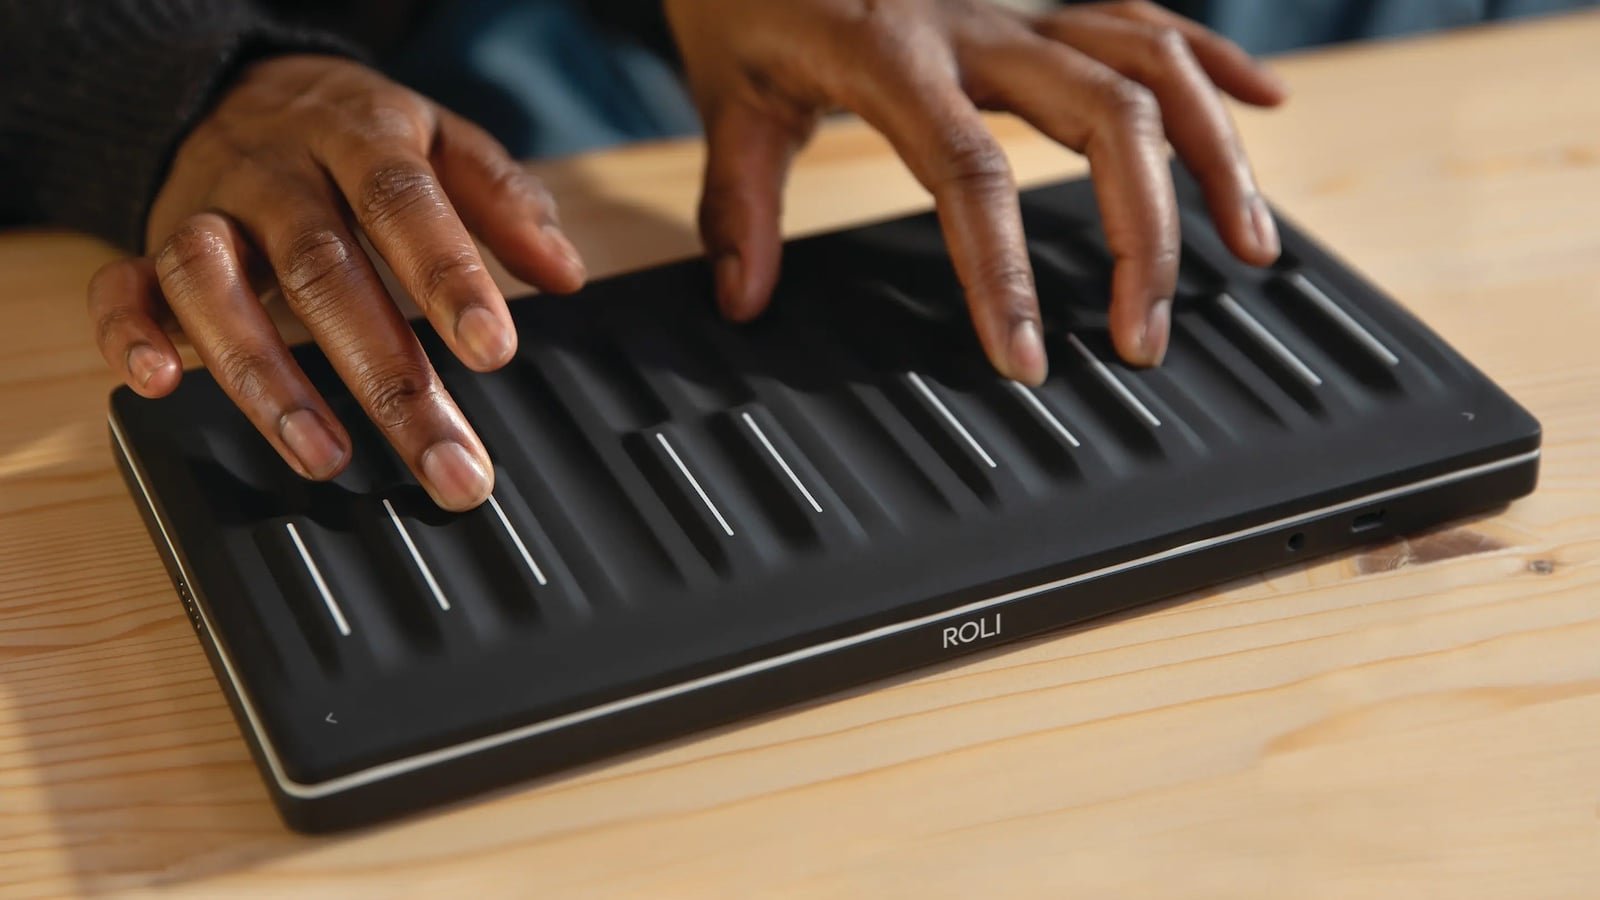 ROLI Seaboard BLOCK M MIDI keyboard has 5D touch technology for intuitive playing